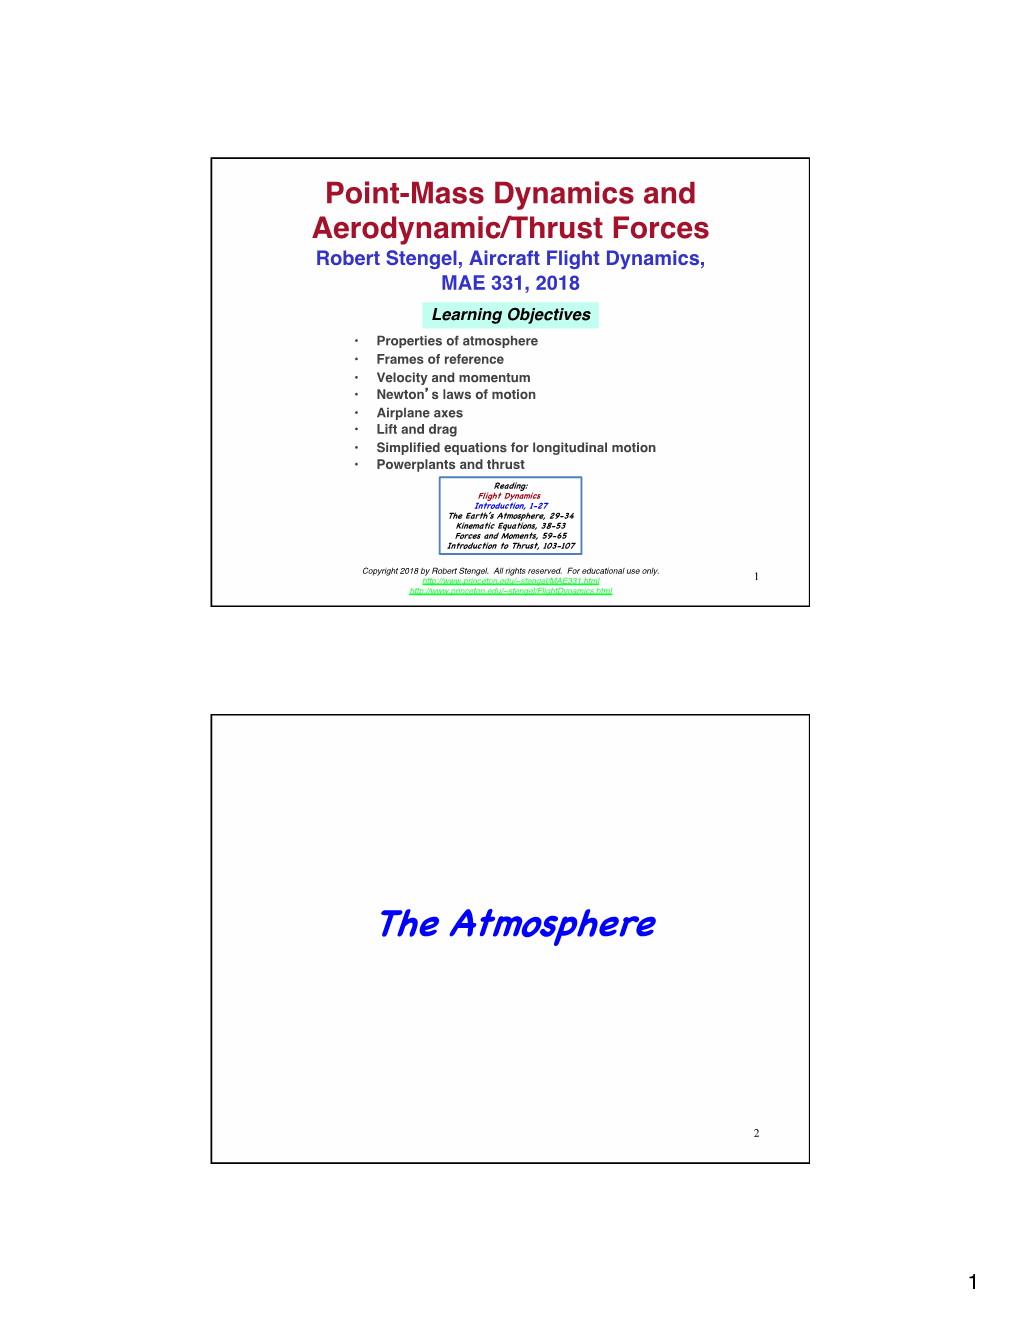 Point-Mass Dynamics and Aerodynamic/Thrust Forces